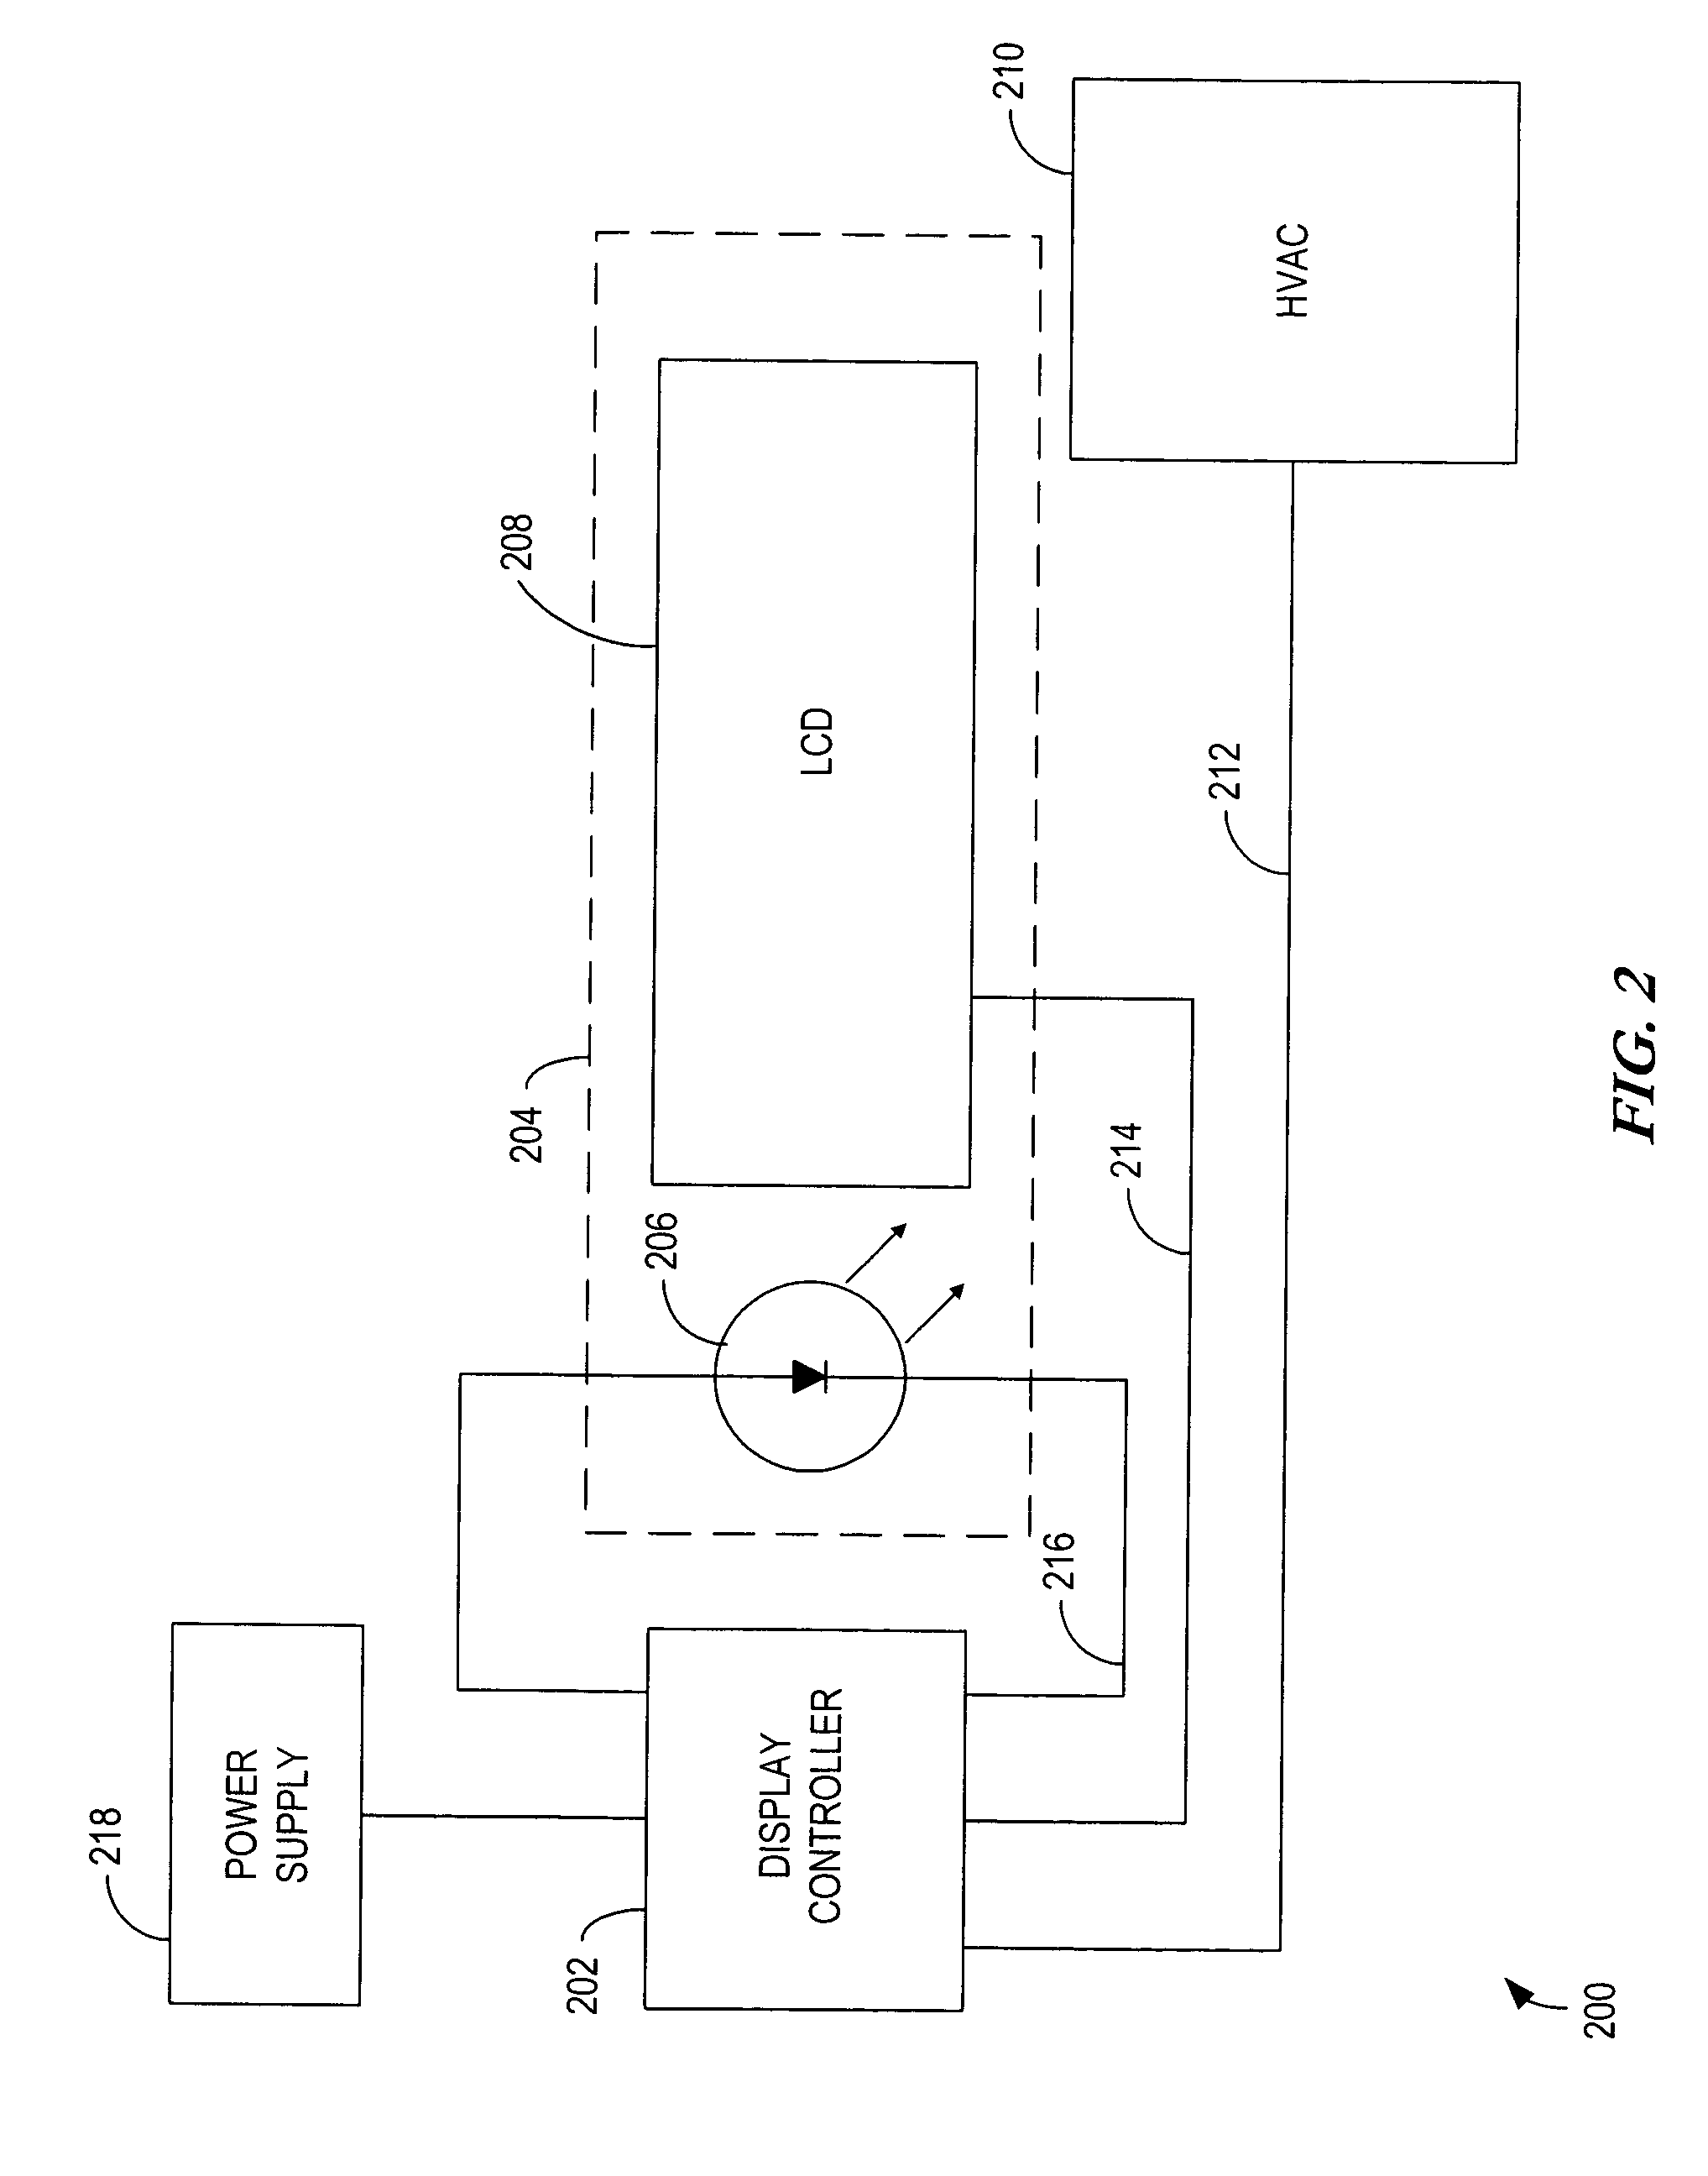 System, apparatus, and method for driving light emitting diodes in low voltage circuits